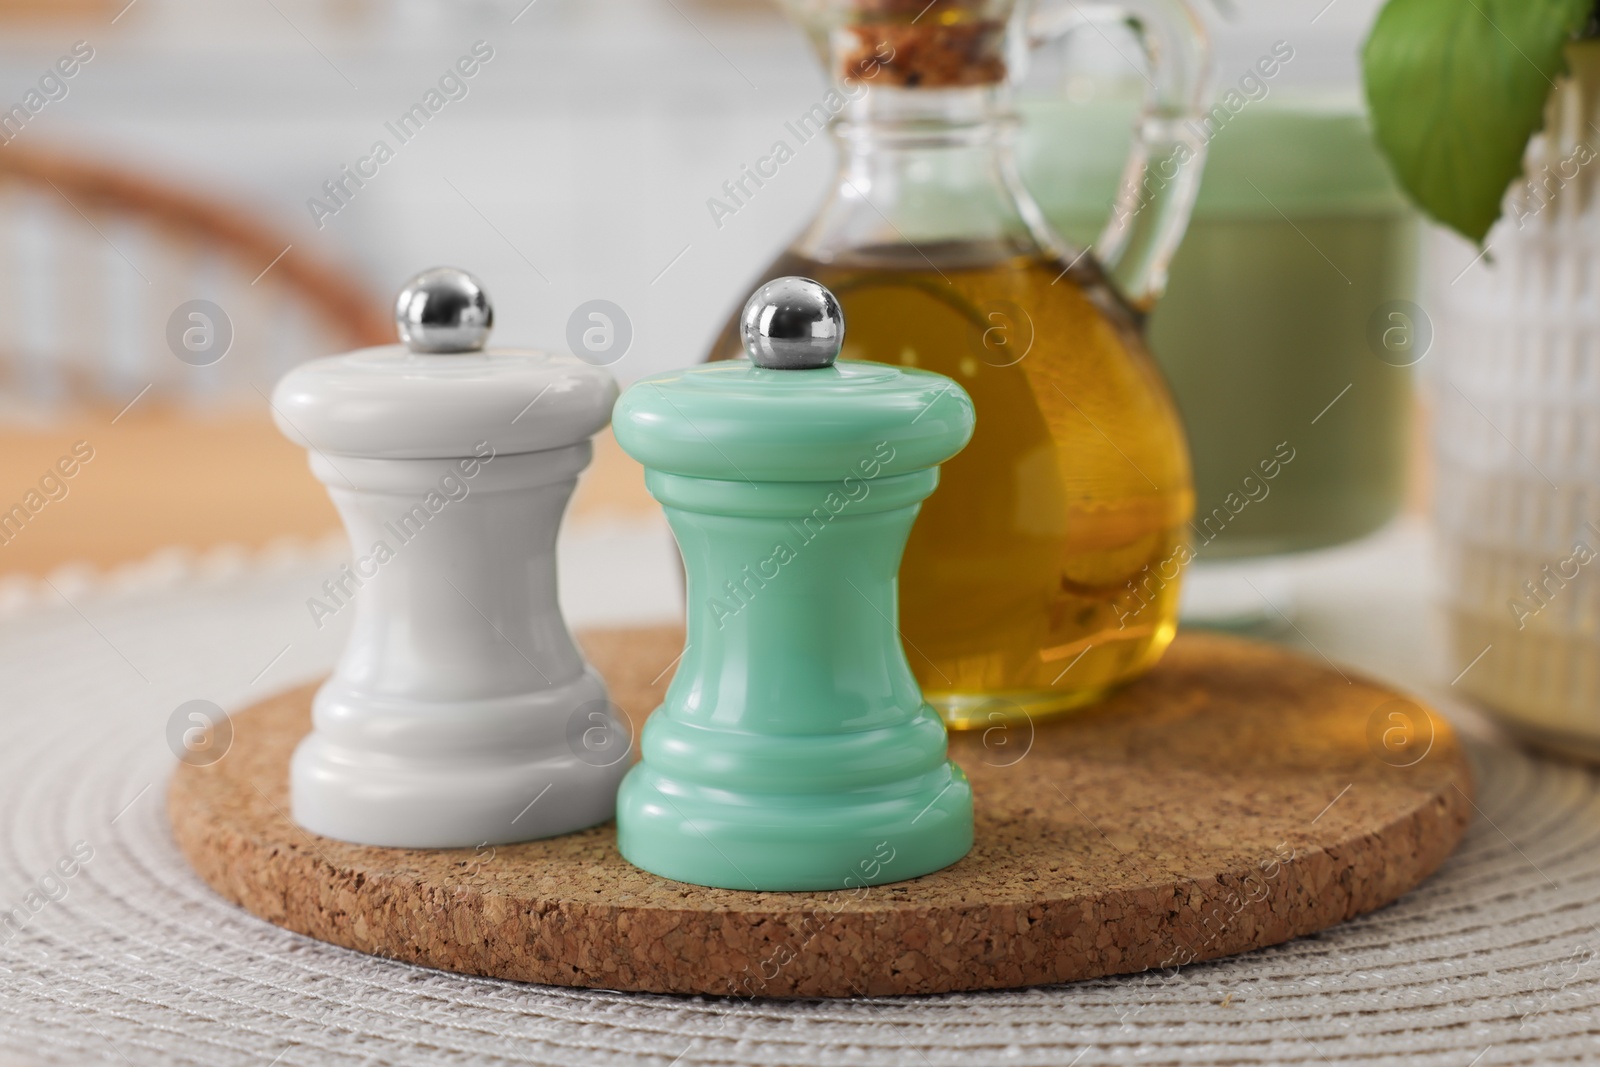 Photo of Salt and pepper shakers and bottle of oil on table